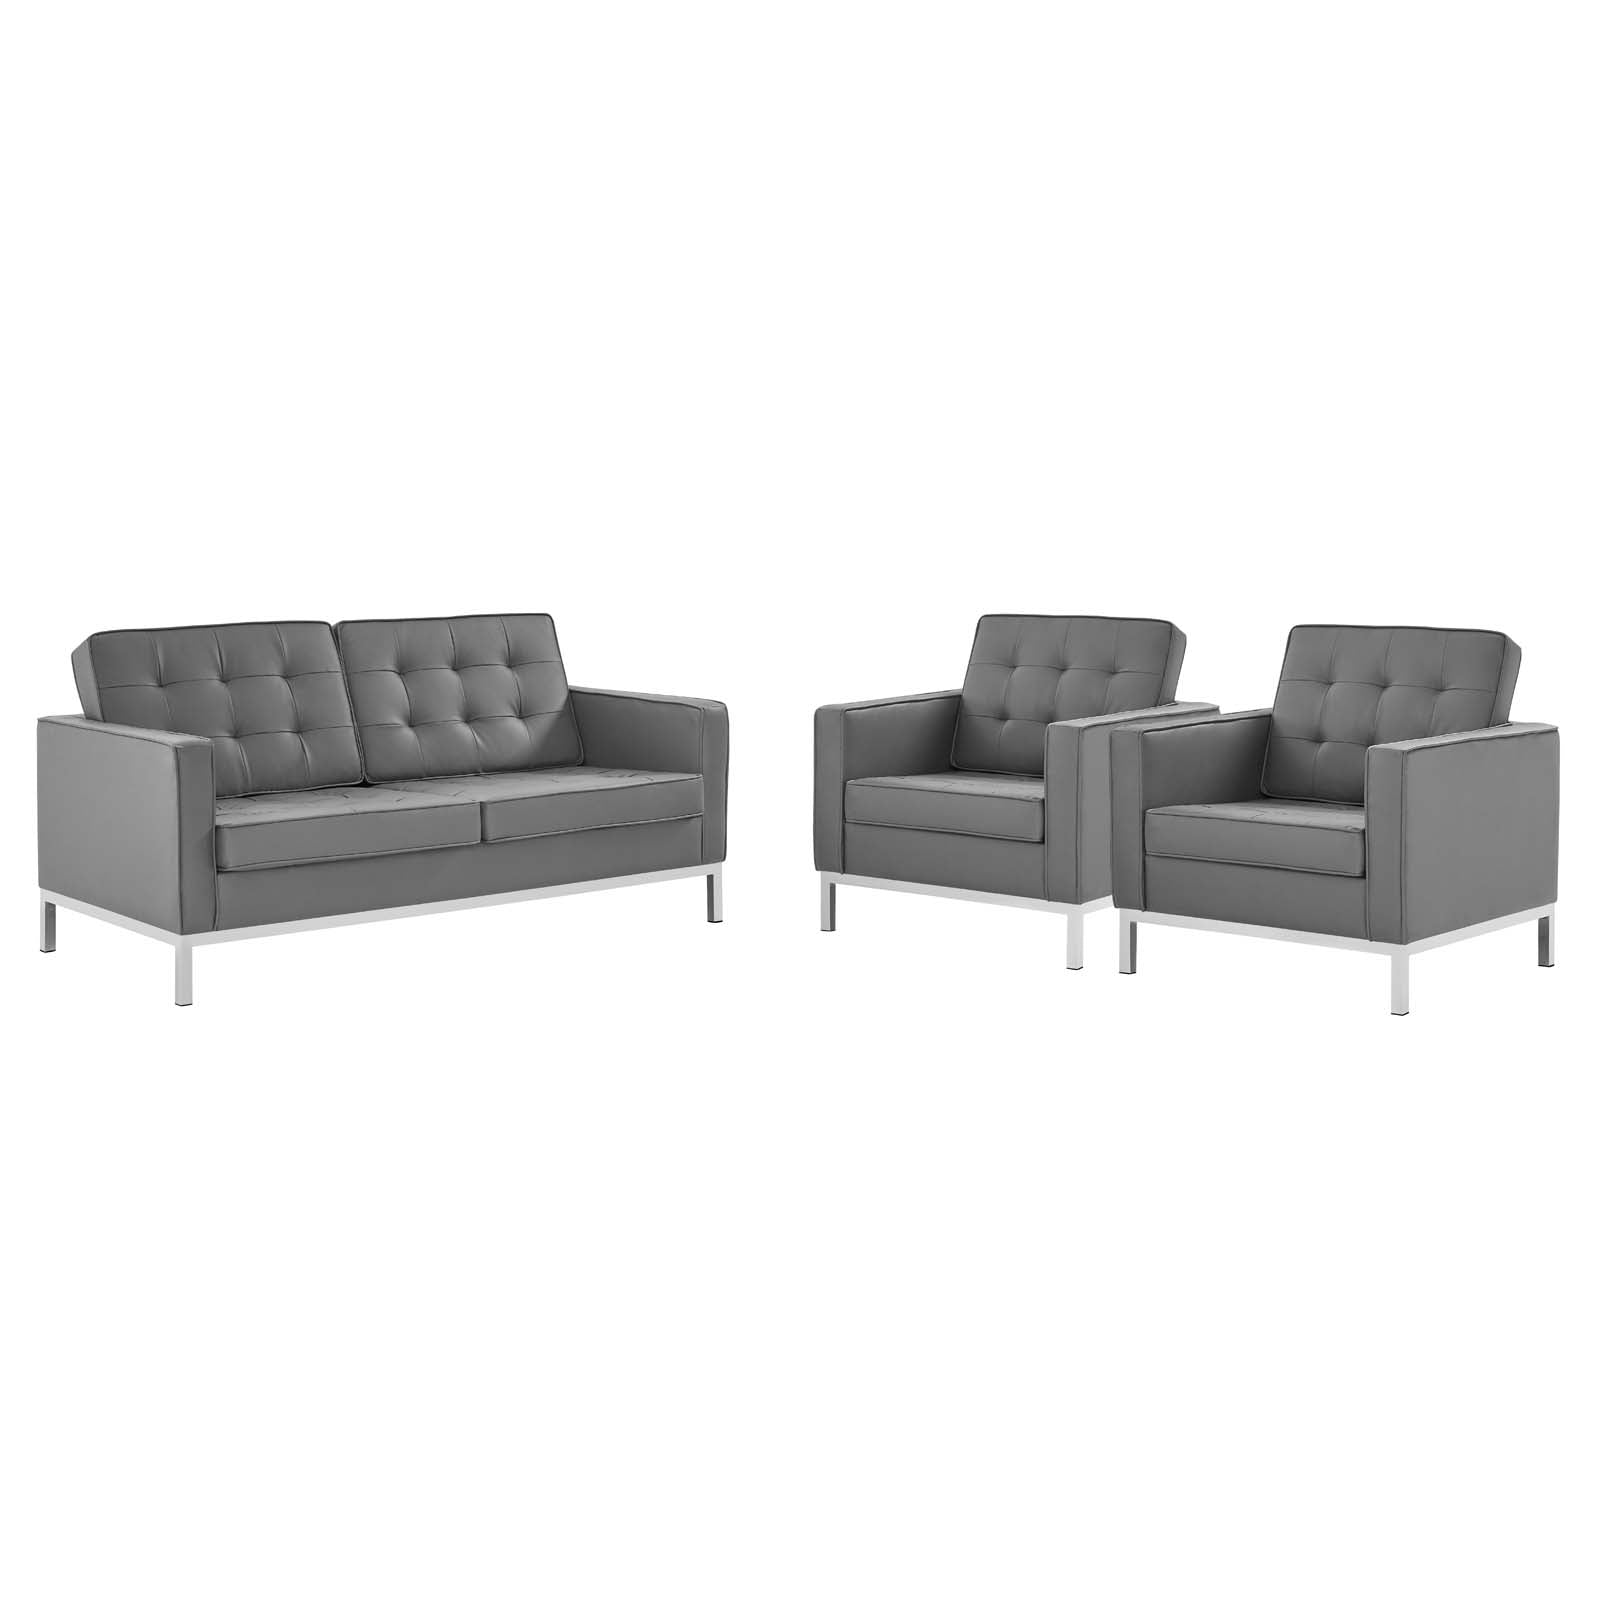 Modway Living Room Sets - Loft-3-Piece-Tufted-Upholstered-Faux-Leather-Set-Silver-Gray